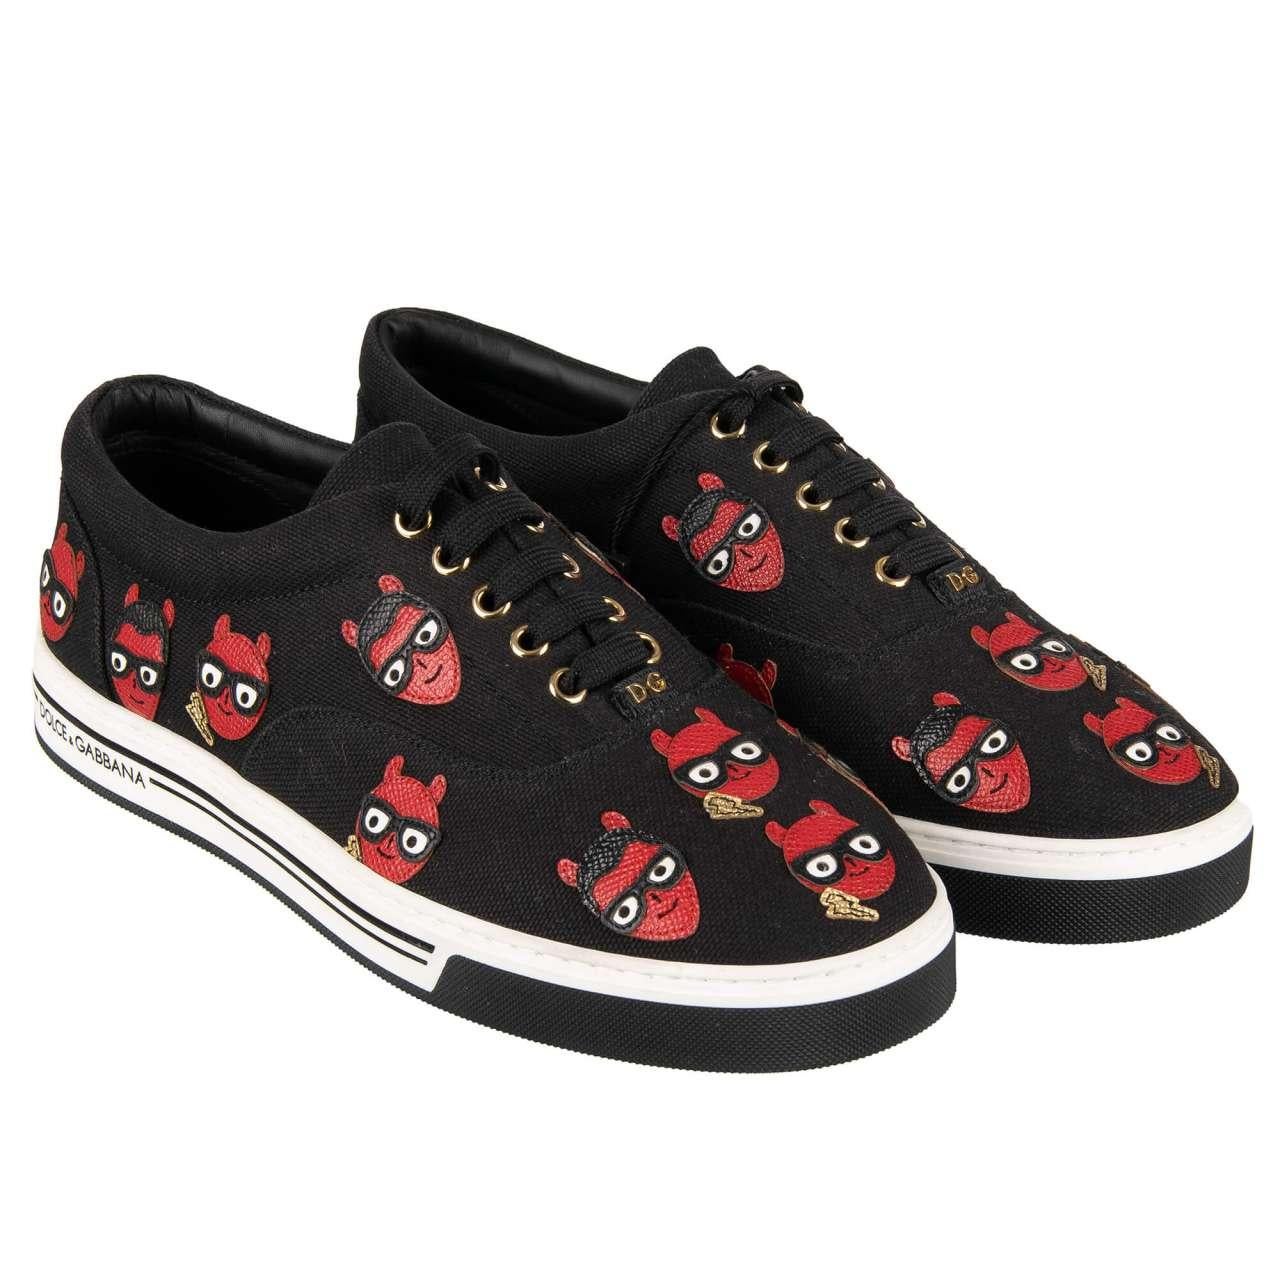 D&G Low-Top Canvas Sneaker ROMA with Leather Embroidery Black EUR 41.5 For Sale 1